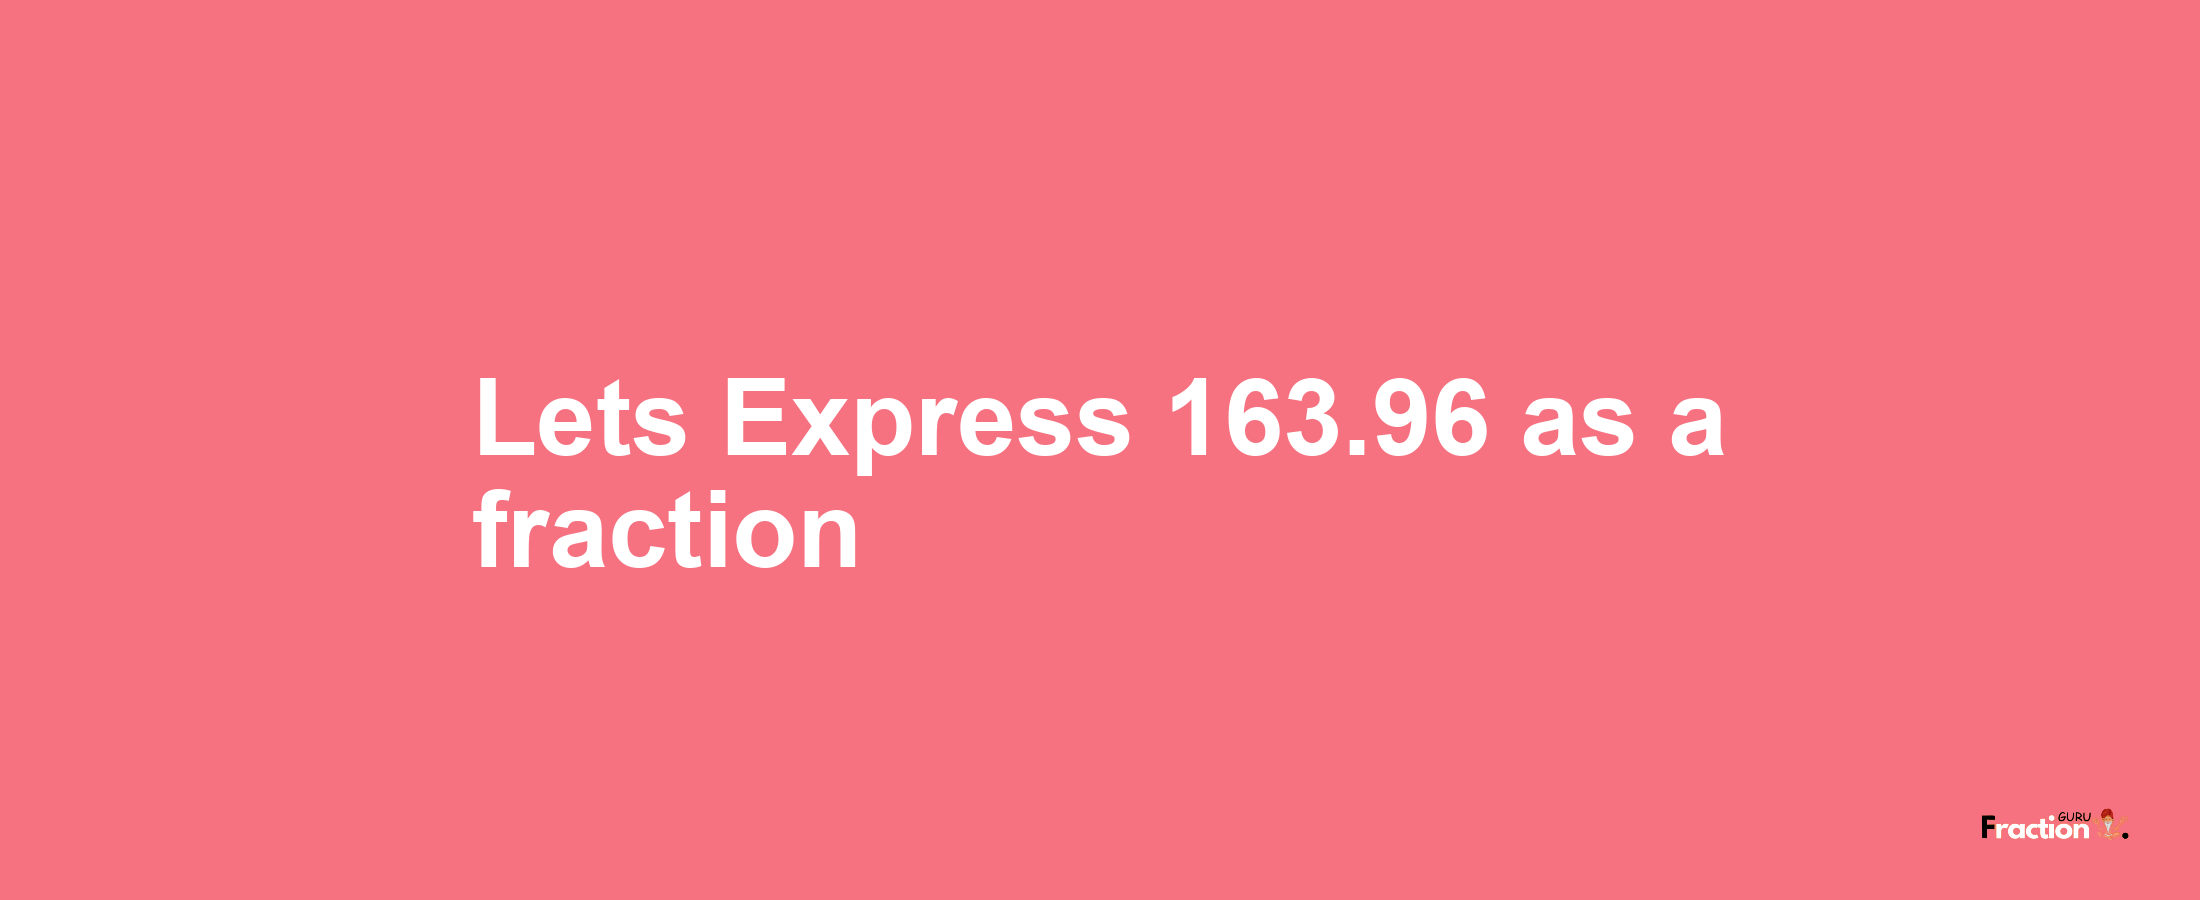 Lets Express 163.96 as afraction